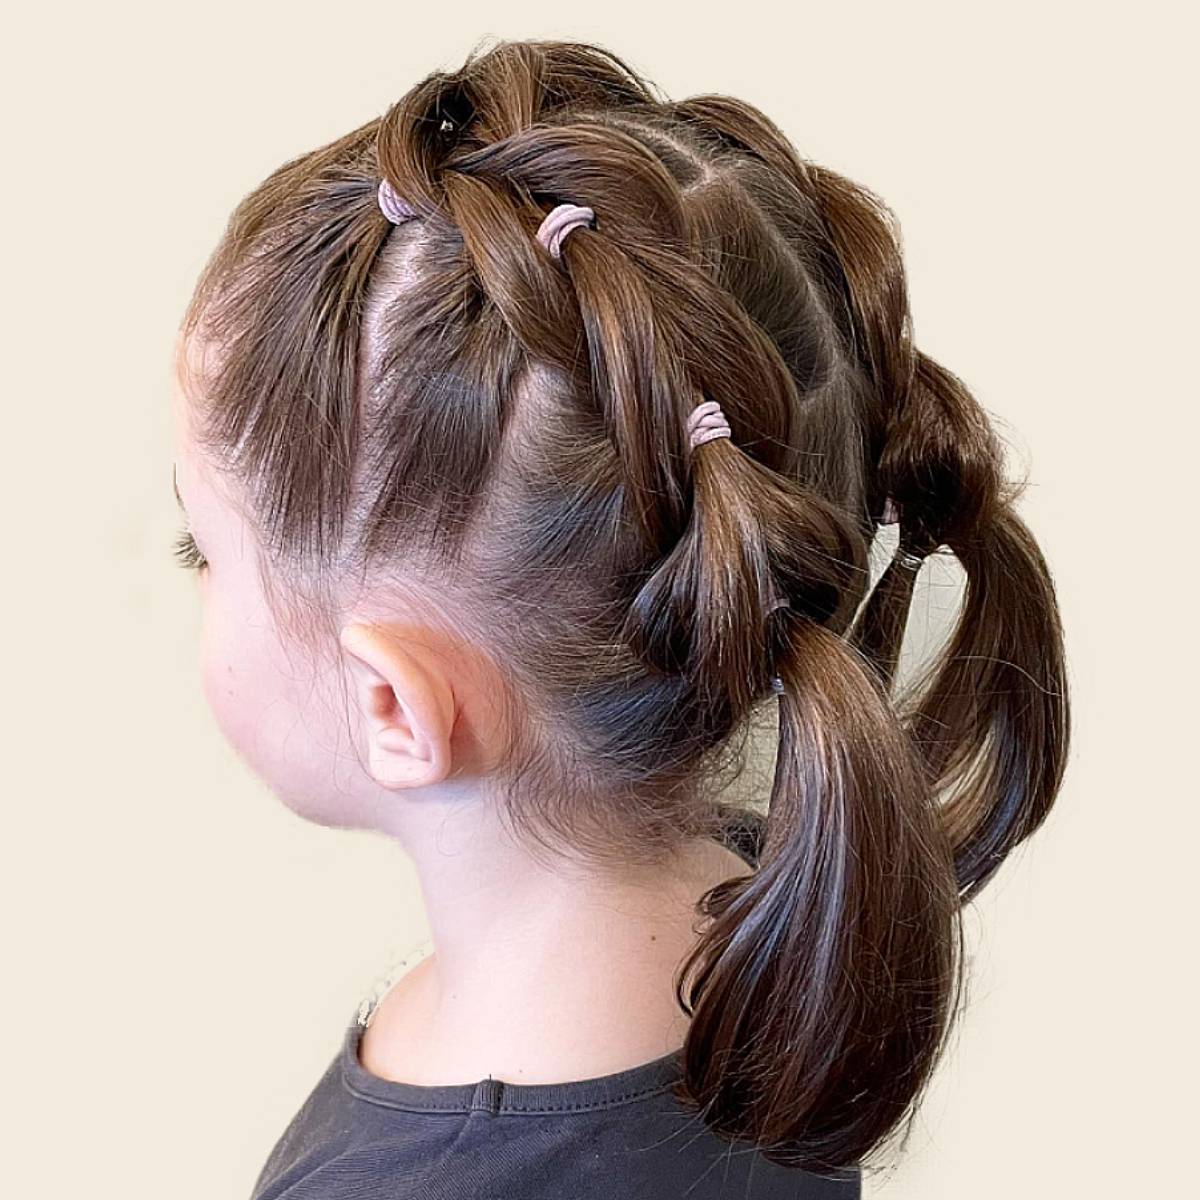 5 Minute Hairstyles for School  Canada lifestyle  Fynes Designs